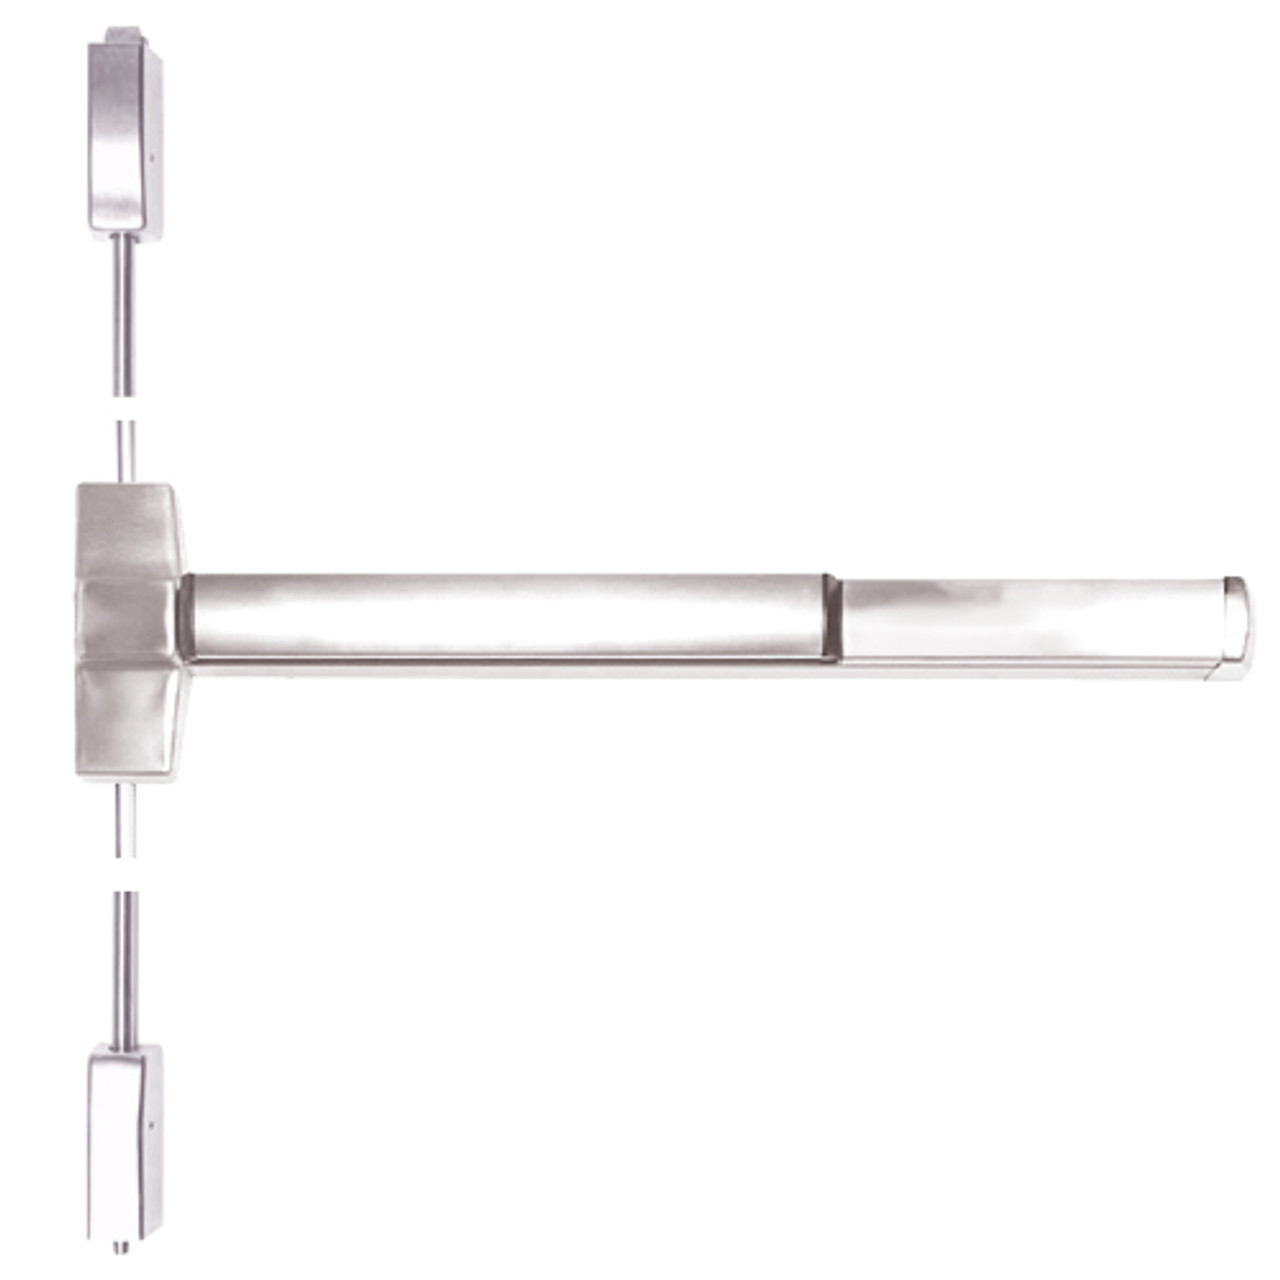 ED5400A-629-MELR Corbin ED5400 Series Fire Rated Vertical Rod Exit Device with Motor Latch Retraction in Bright Stainless Steel Finish